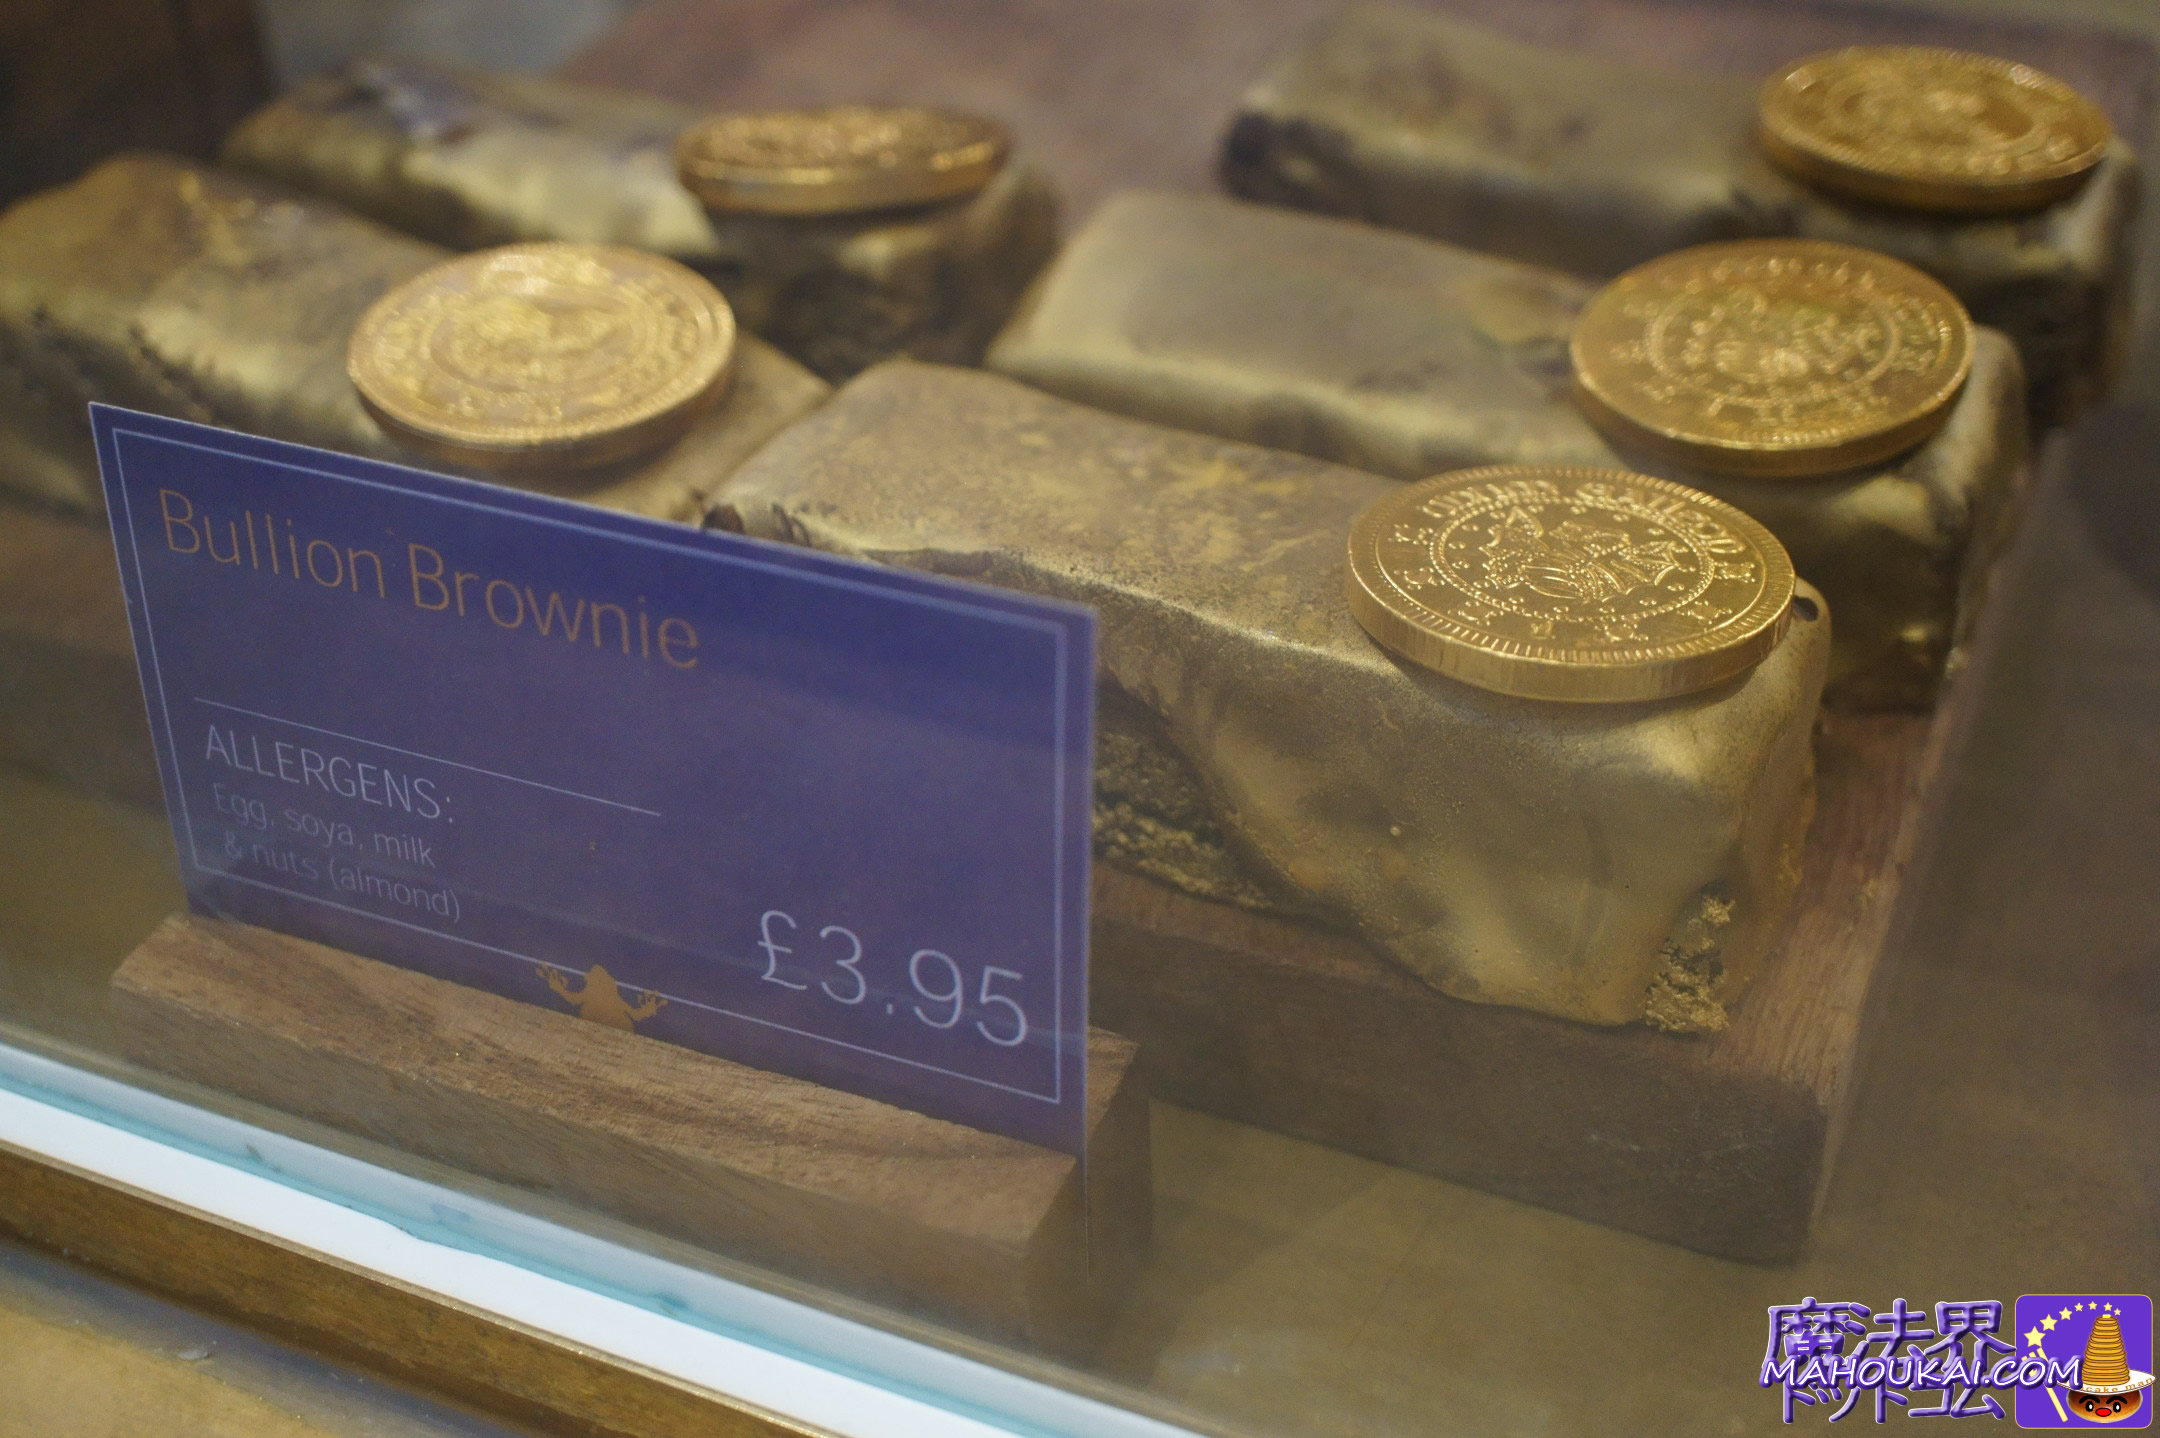 Bullion Brownie £3.95 THE CHOCOLATE FROG CAFE  Frog Chocolate Cafe Harry Potter Studio Tour London